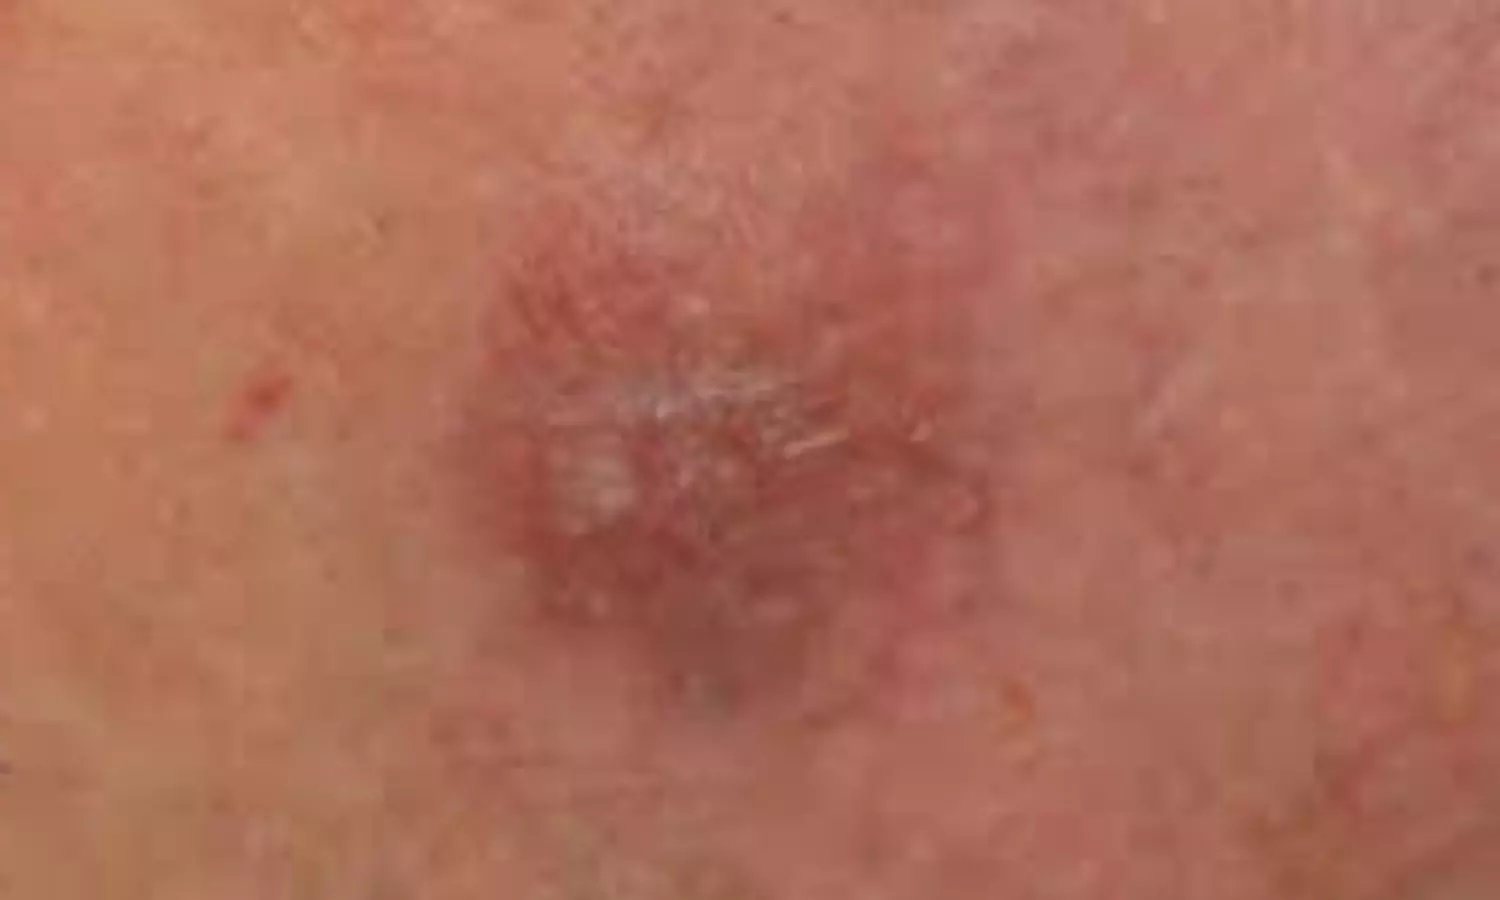 Minocycline Shows Promising for Treating Rare Skin Condition Granuloma Faciale: Case report